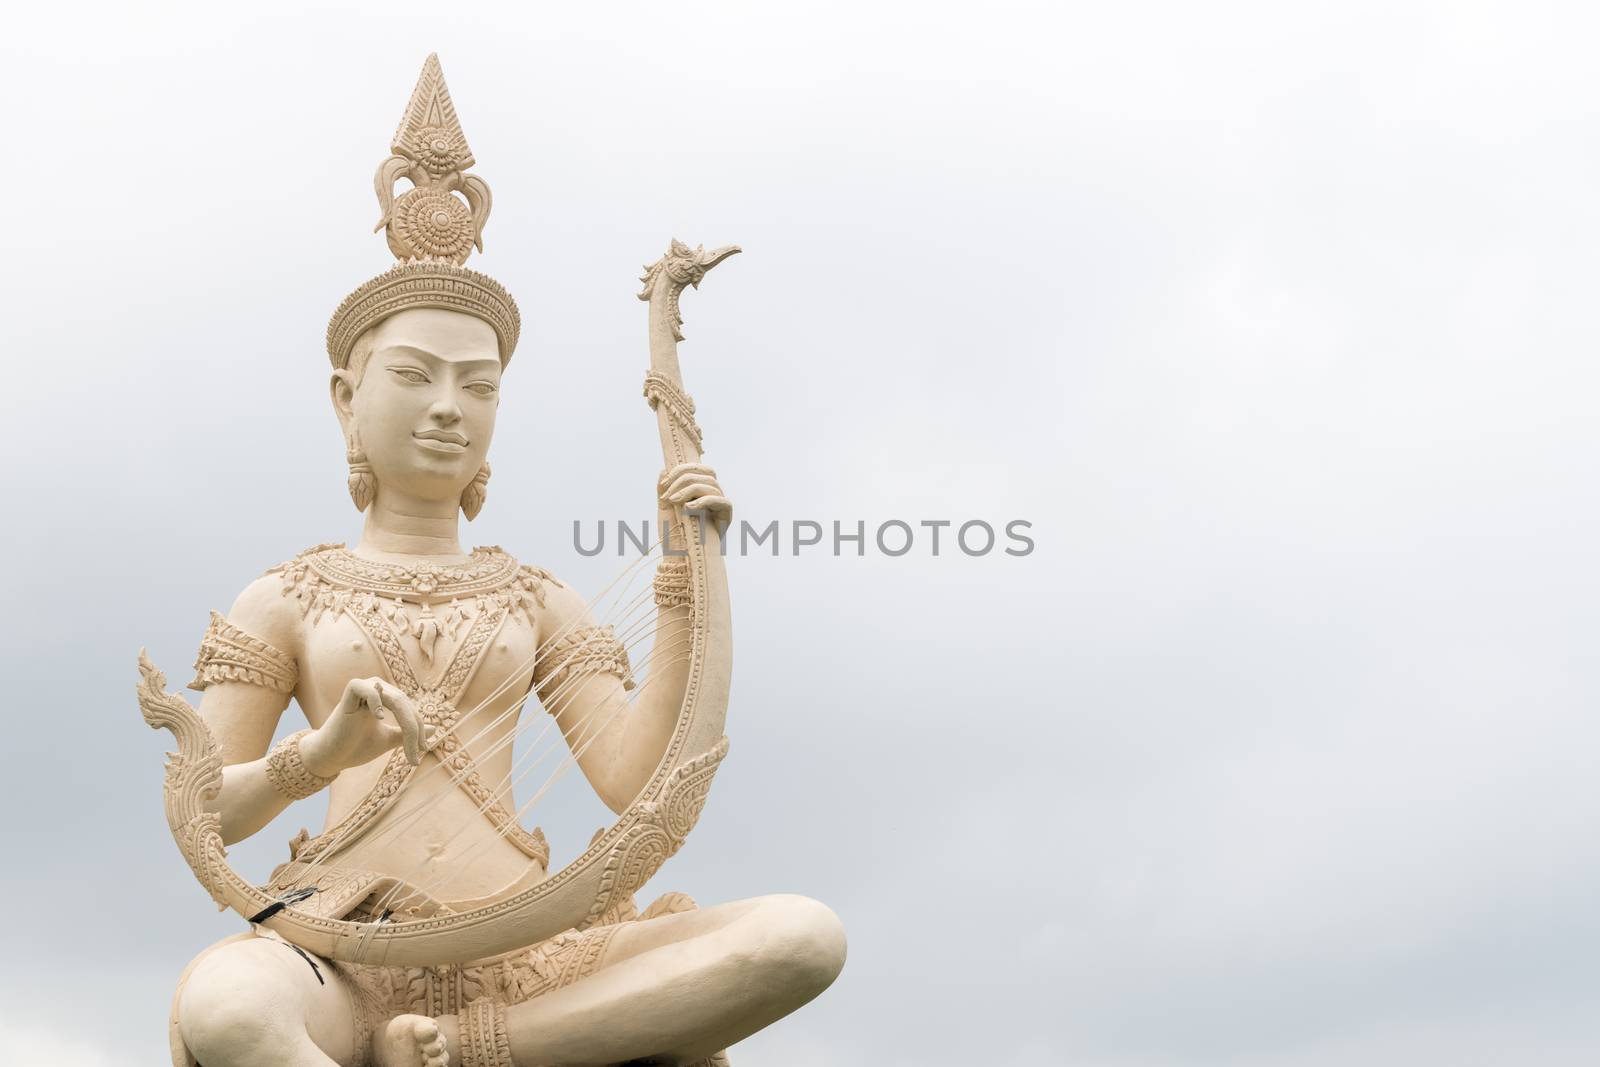 A classical Cambodian Goddess statue playing with a traditional harp along the sea at Kep, Cambodia, Asia